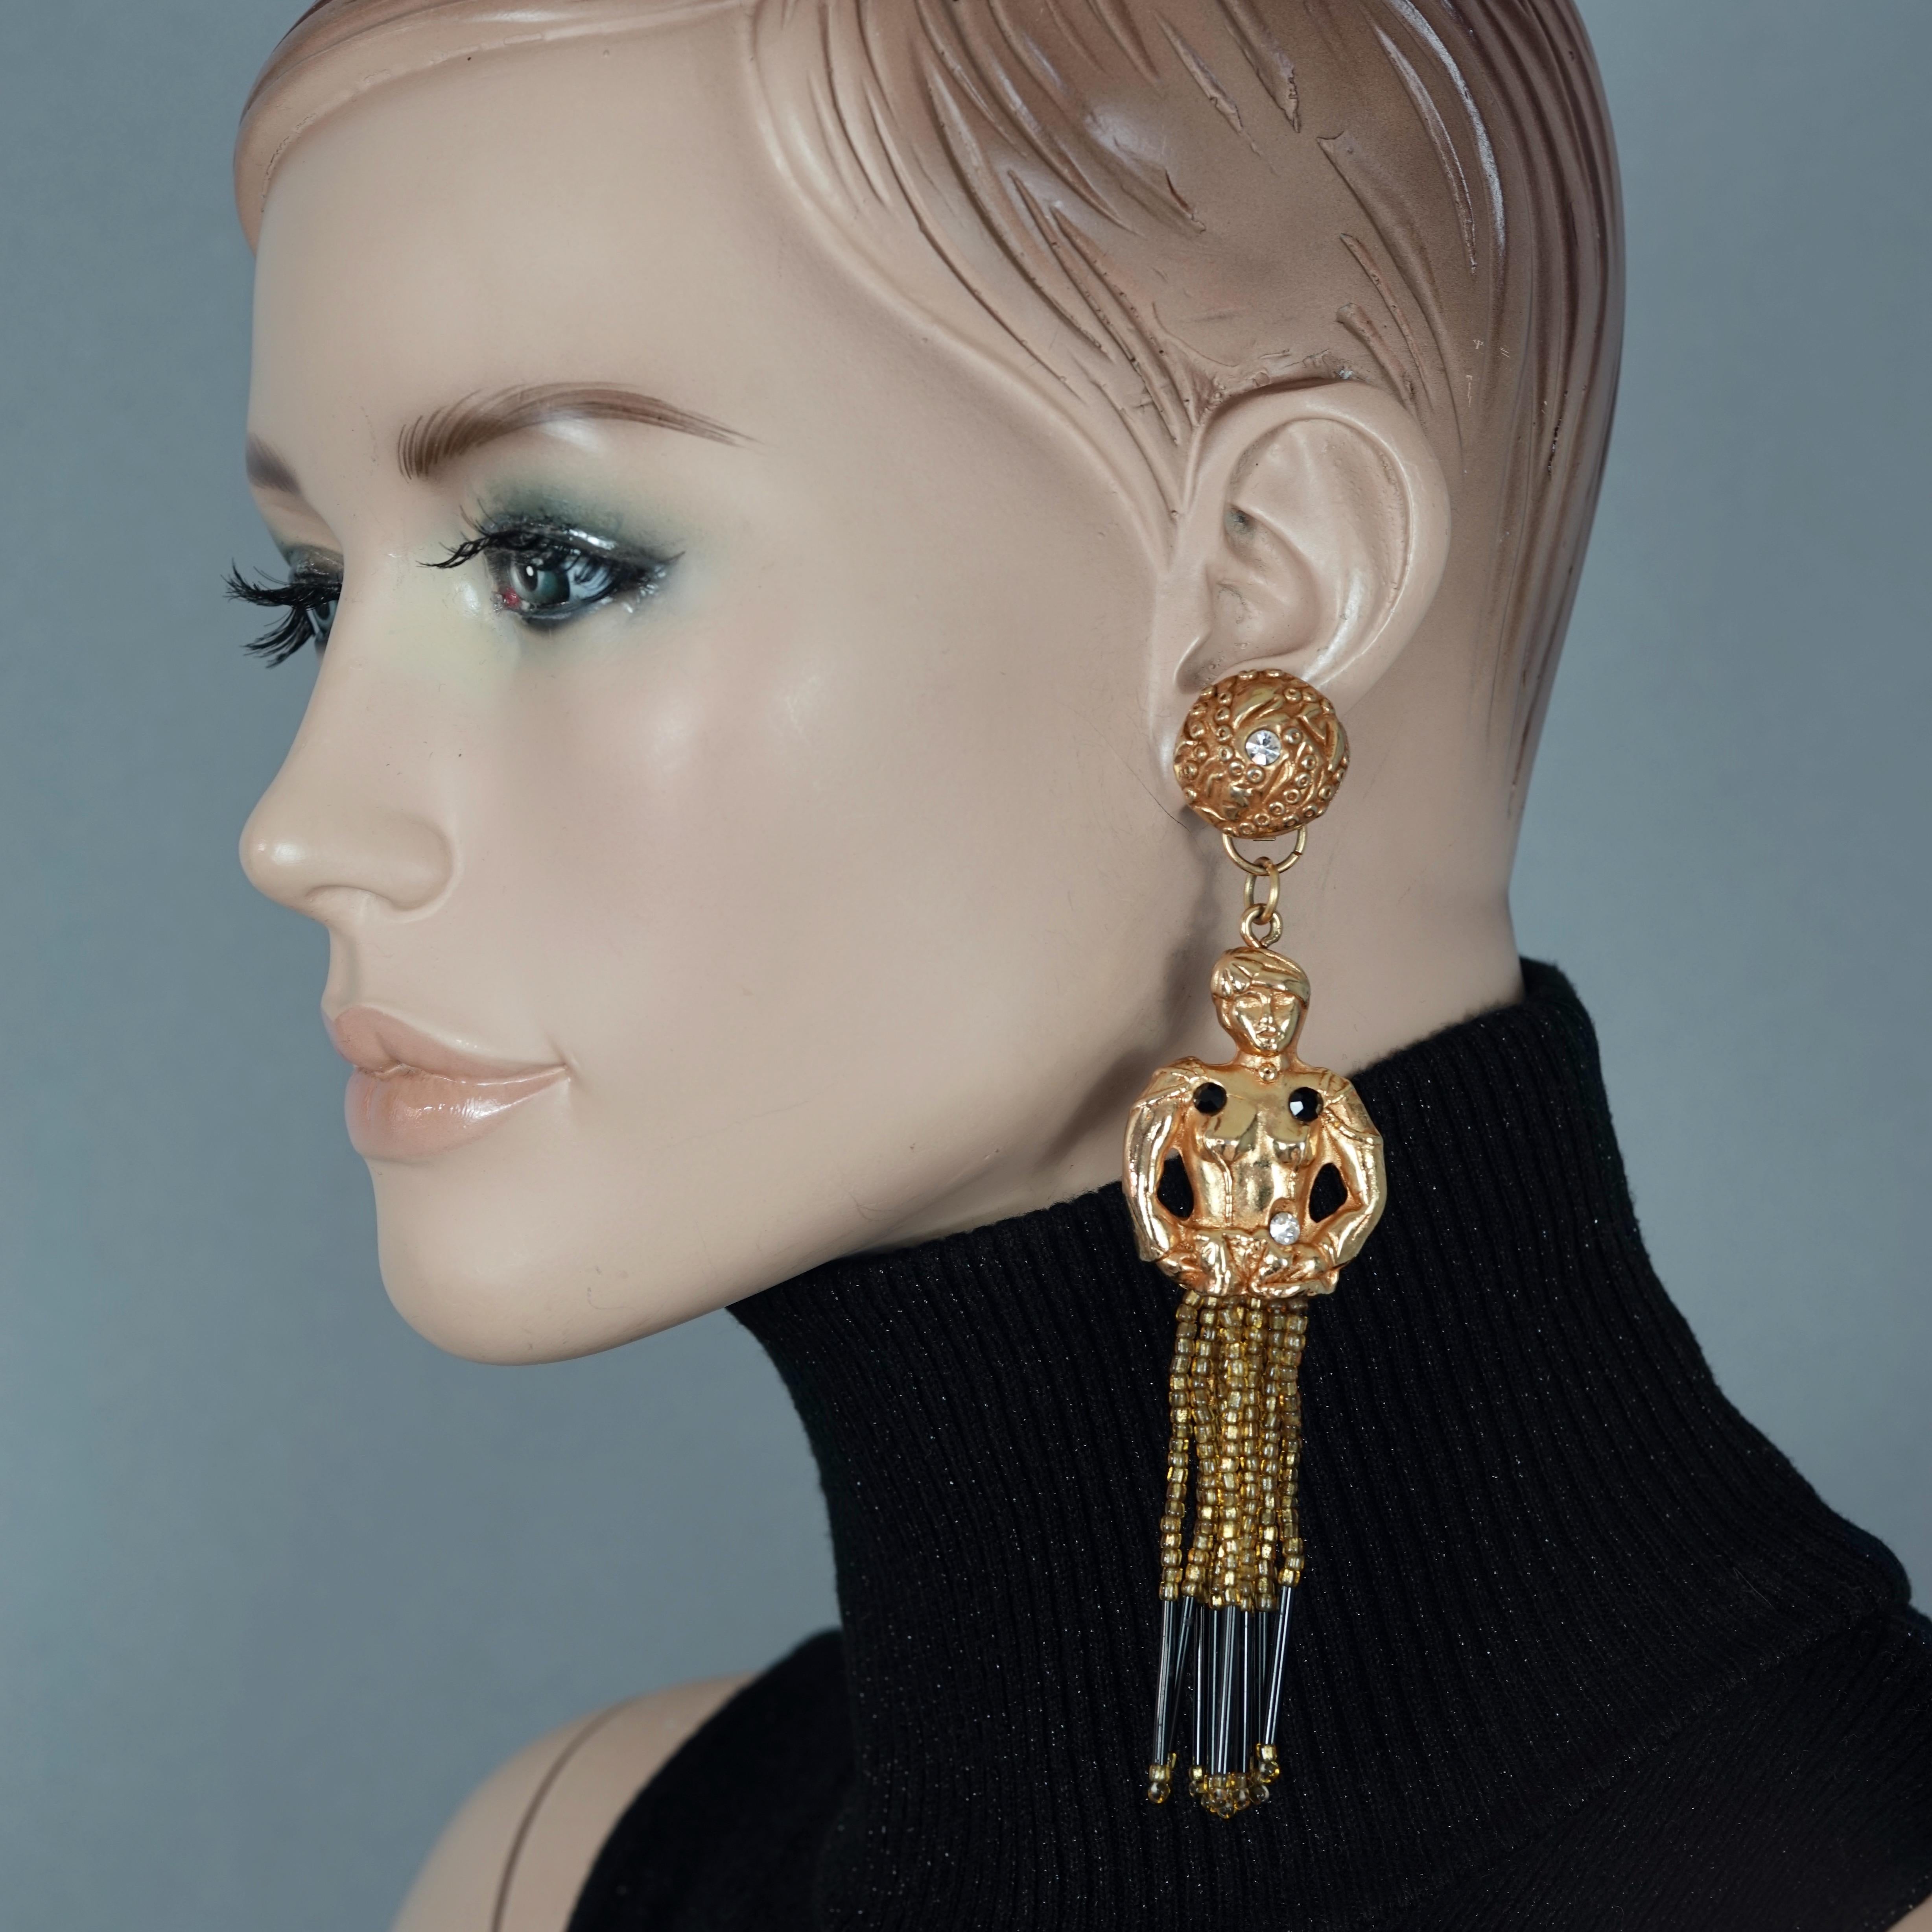 Vintage ALEXS LAHELLEC PARIS Whimsical Turban Lady Tassel Figural  Earrings

Measurements:
Height: 5.51 inches (14 cm)
Width: 1.25 inches (3.2 cm)
Weight per Earring: 22 grams

Features:
- 100% Authentic ALEXS LAHELLEC PARIS.
- Whimsical earrings